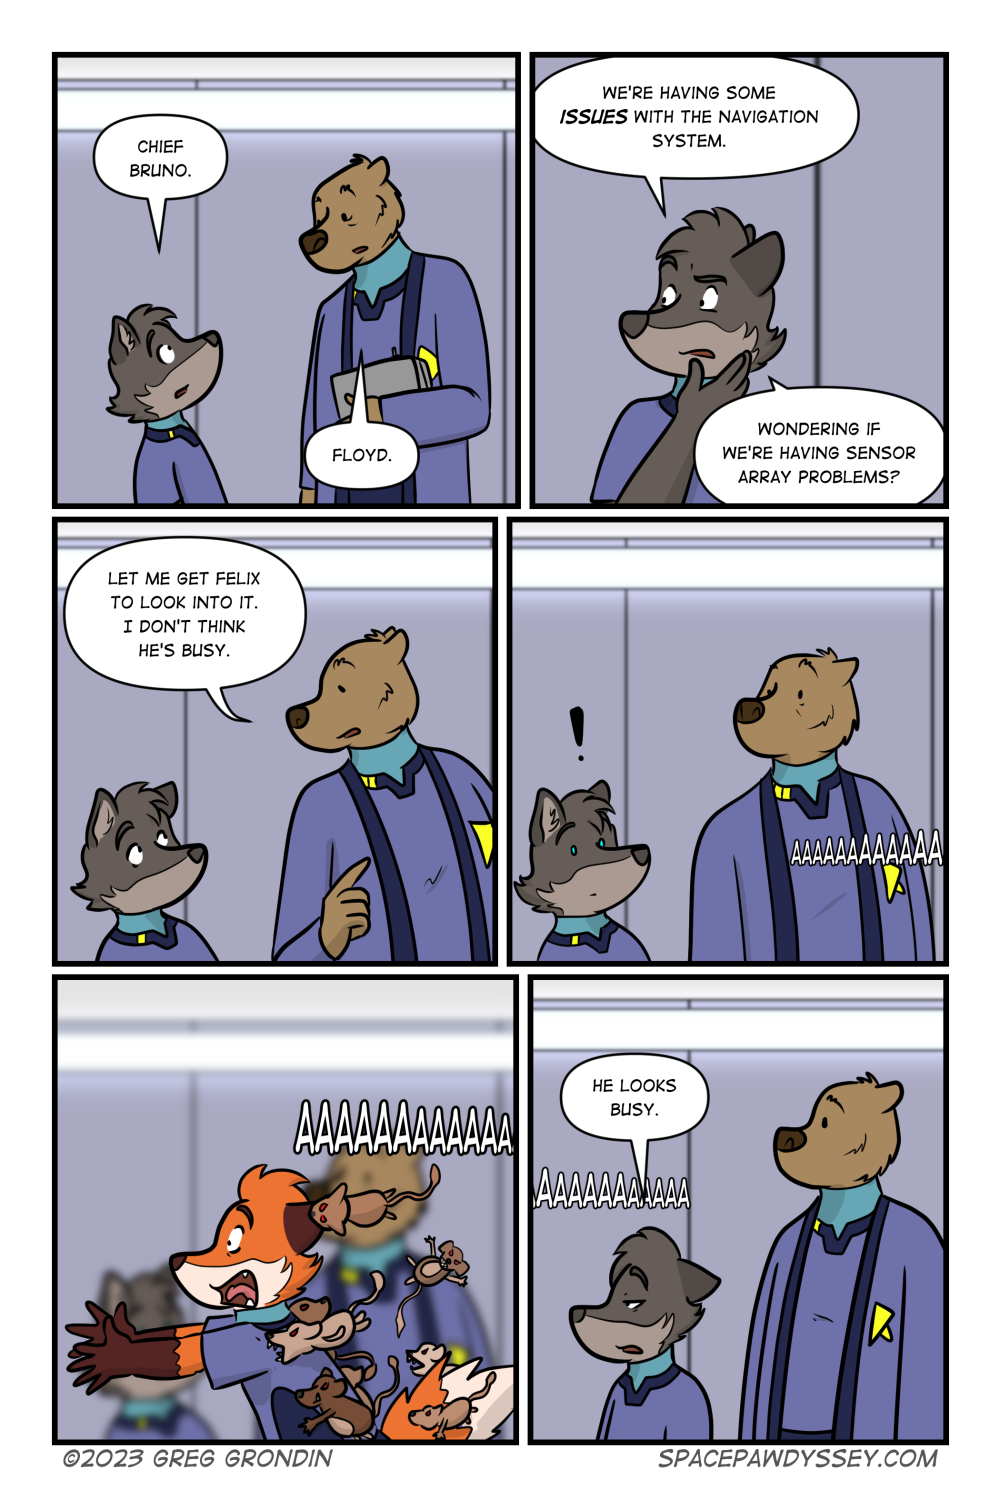 Space Pawdyssey #616